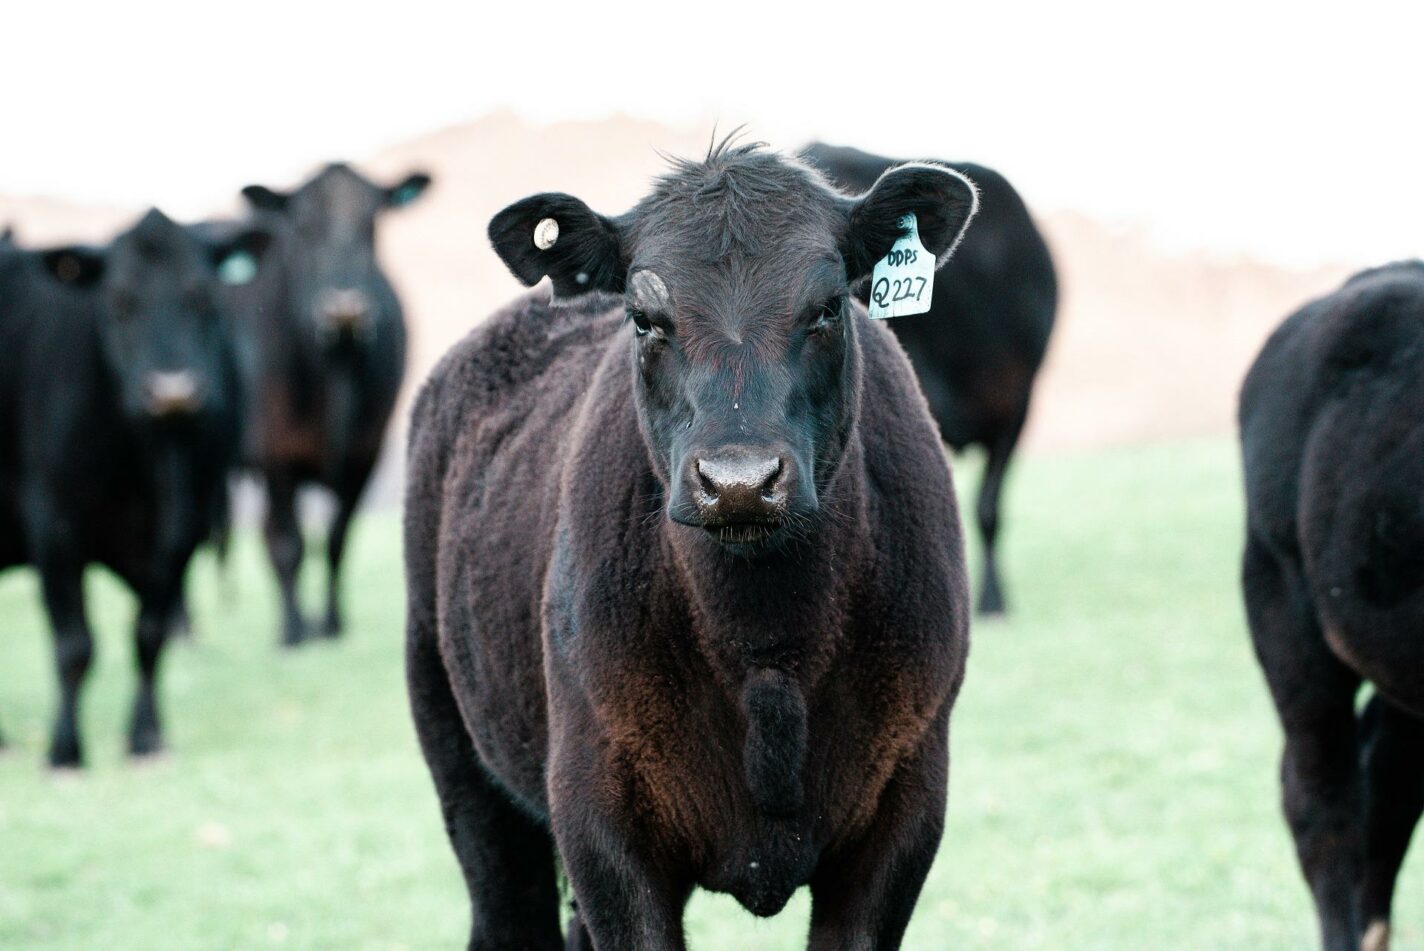 A close up of a black cow standing amidst a herd of other black cows.